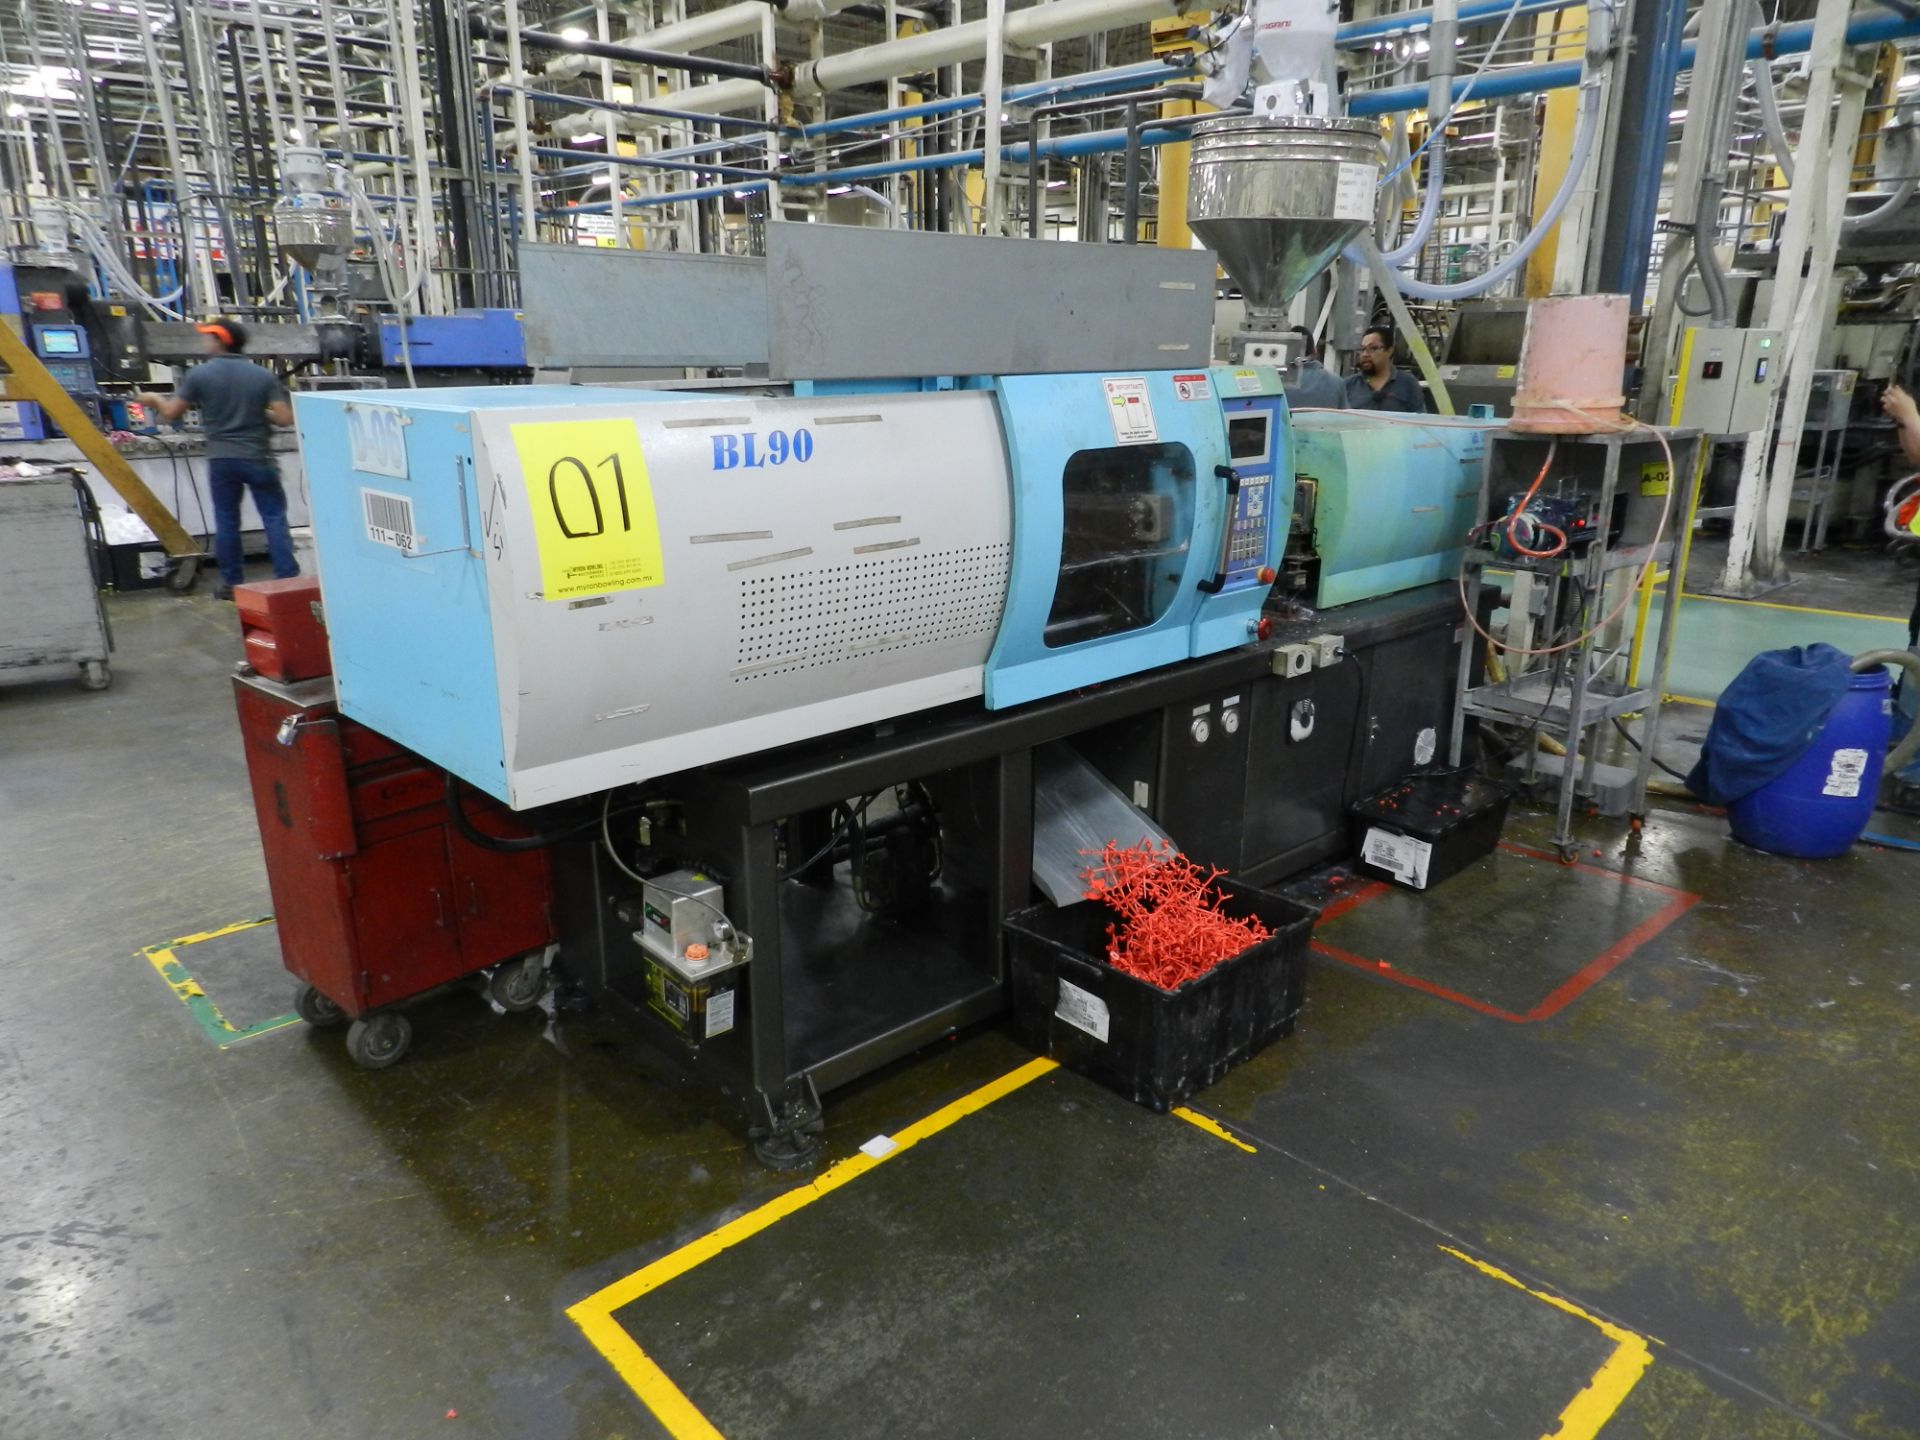 90 TON BELKEN BL90C FOR PLASTIC INJECTION, YEAR 2014. 11KW ENGINE AT 50HZ, 36 CM3 INJECTION LOAD.